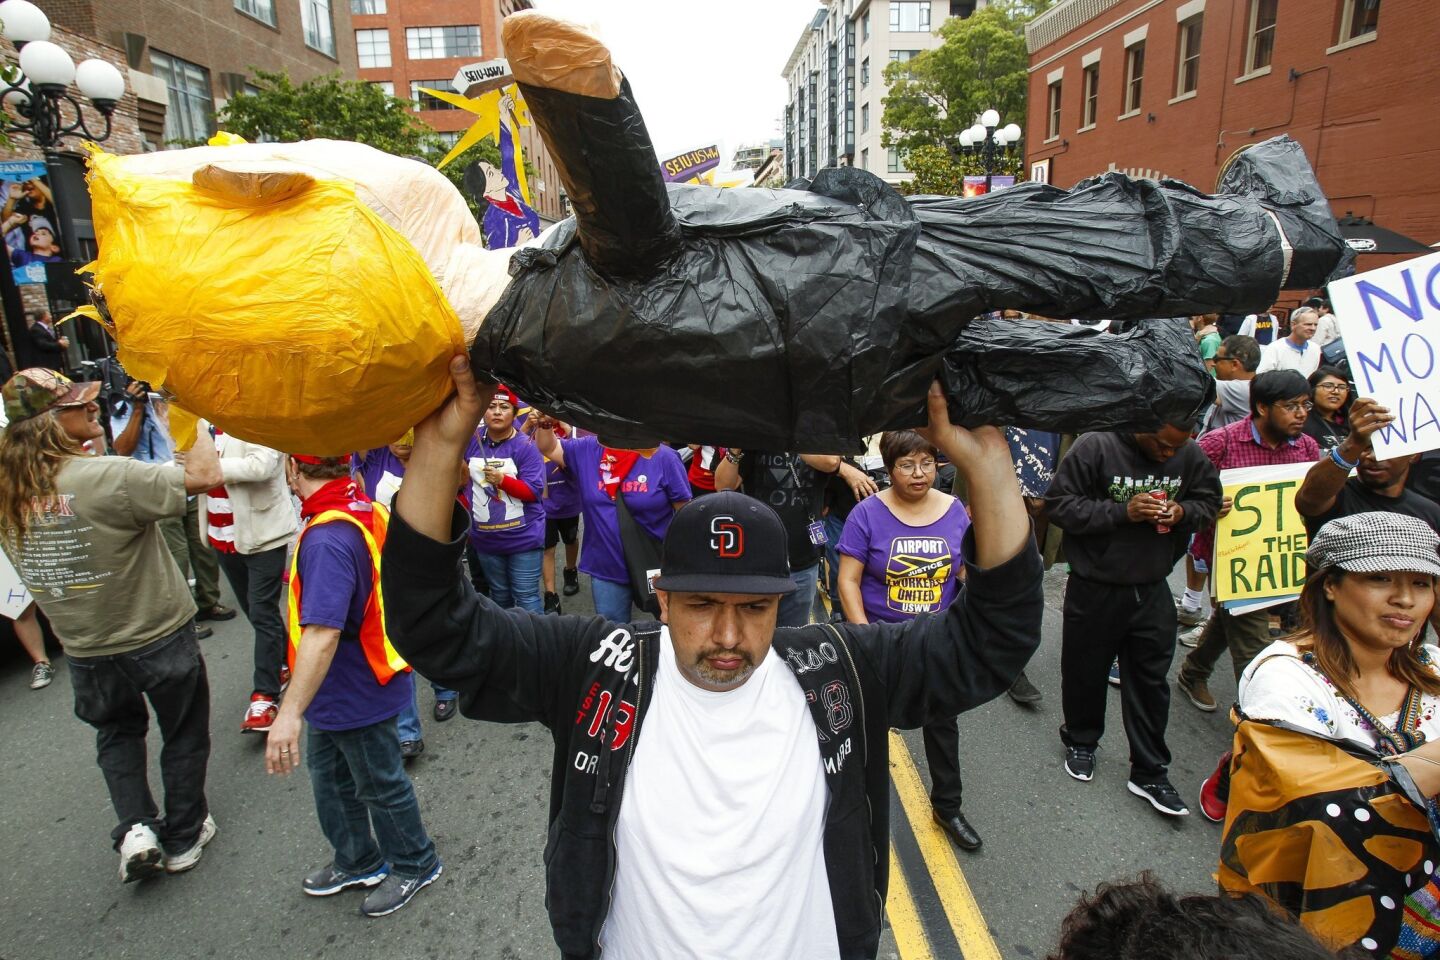 Noel Garcia carries a piñata in the likeness of Donald Trump as he and a group of anti-Trump protesters march down 5th Avenue.